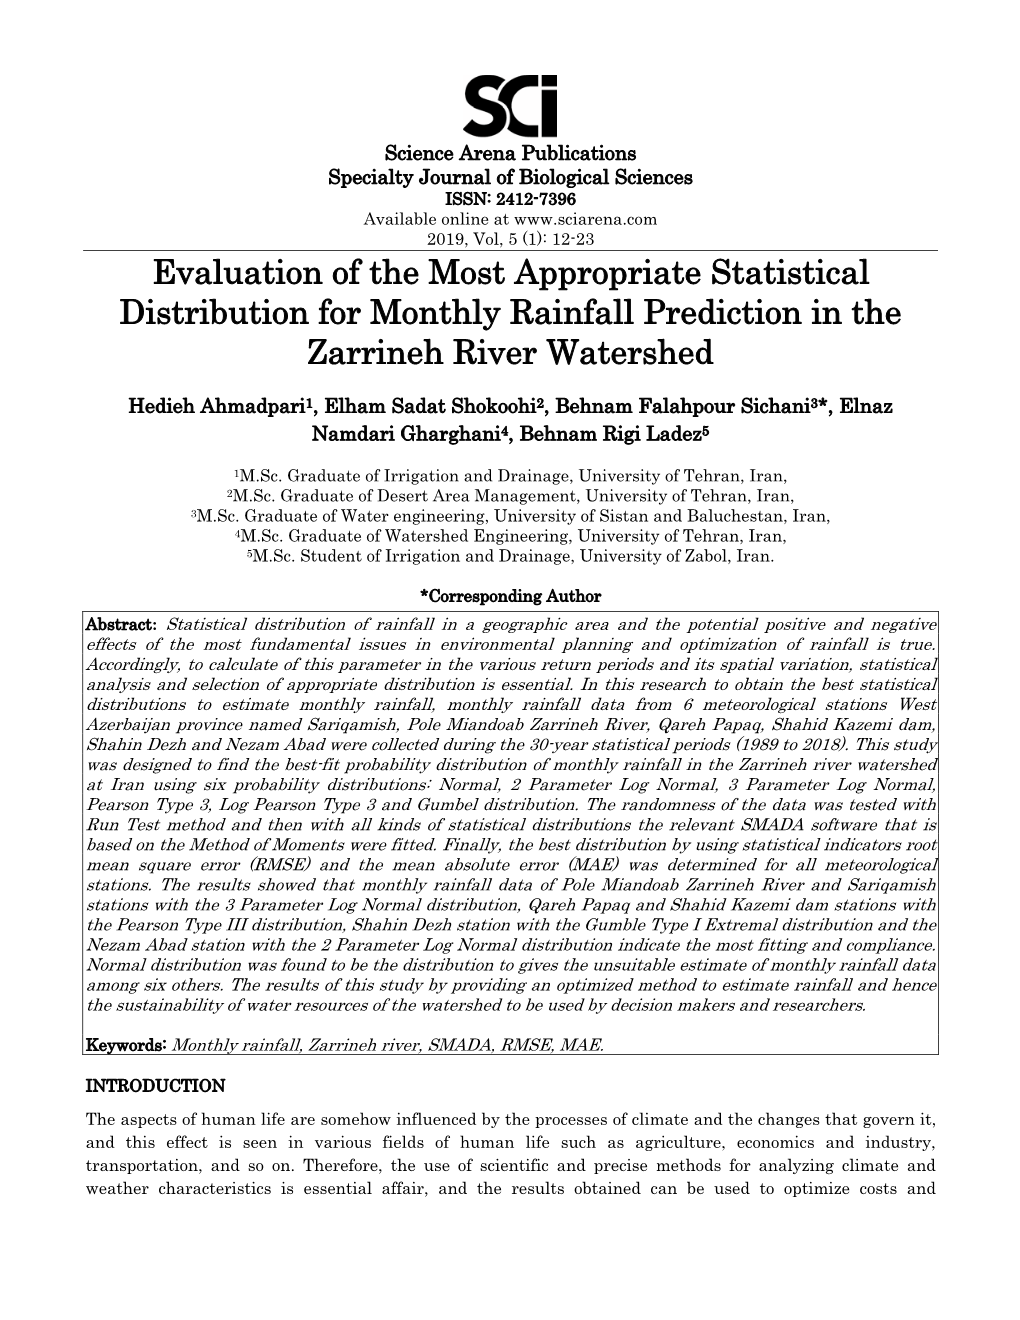 Evaluation of the Most Appropriate Statistical Distribution for Monthly Rainfall Prediction in the Zarrineh River Watershed